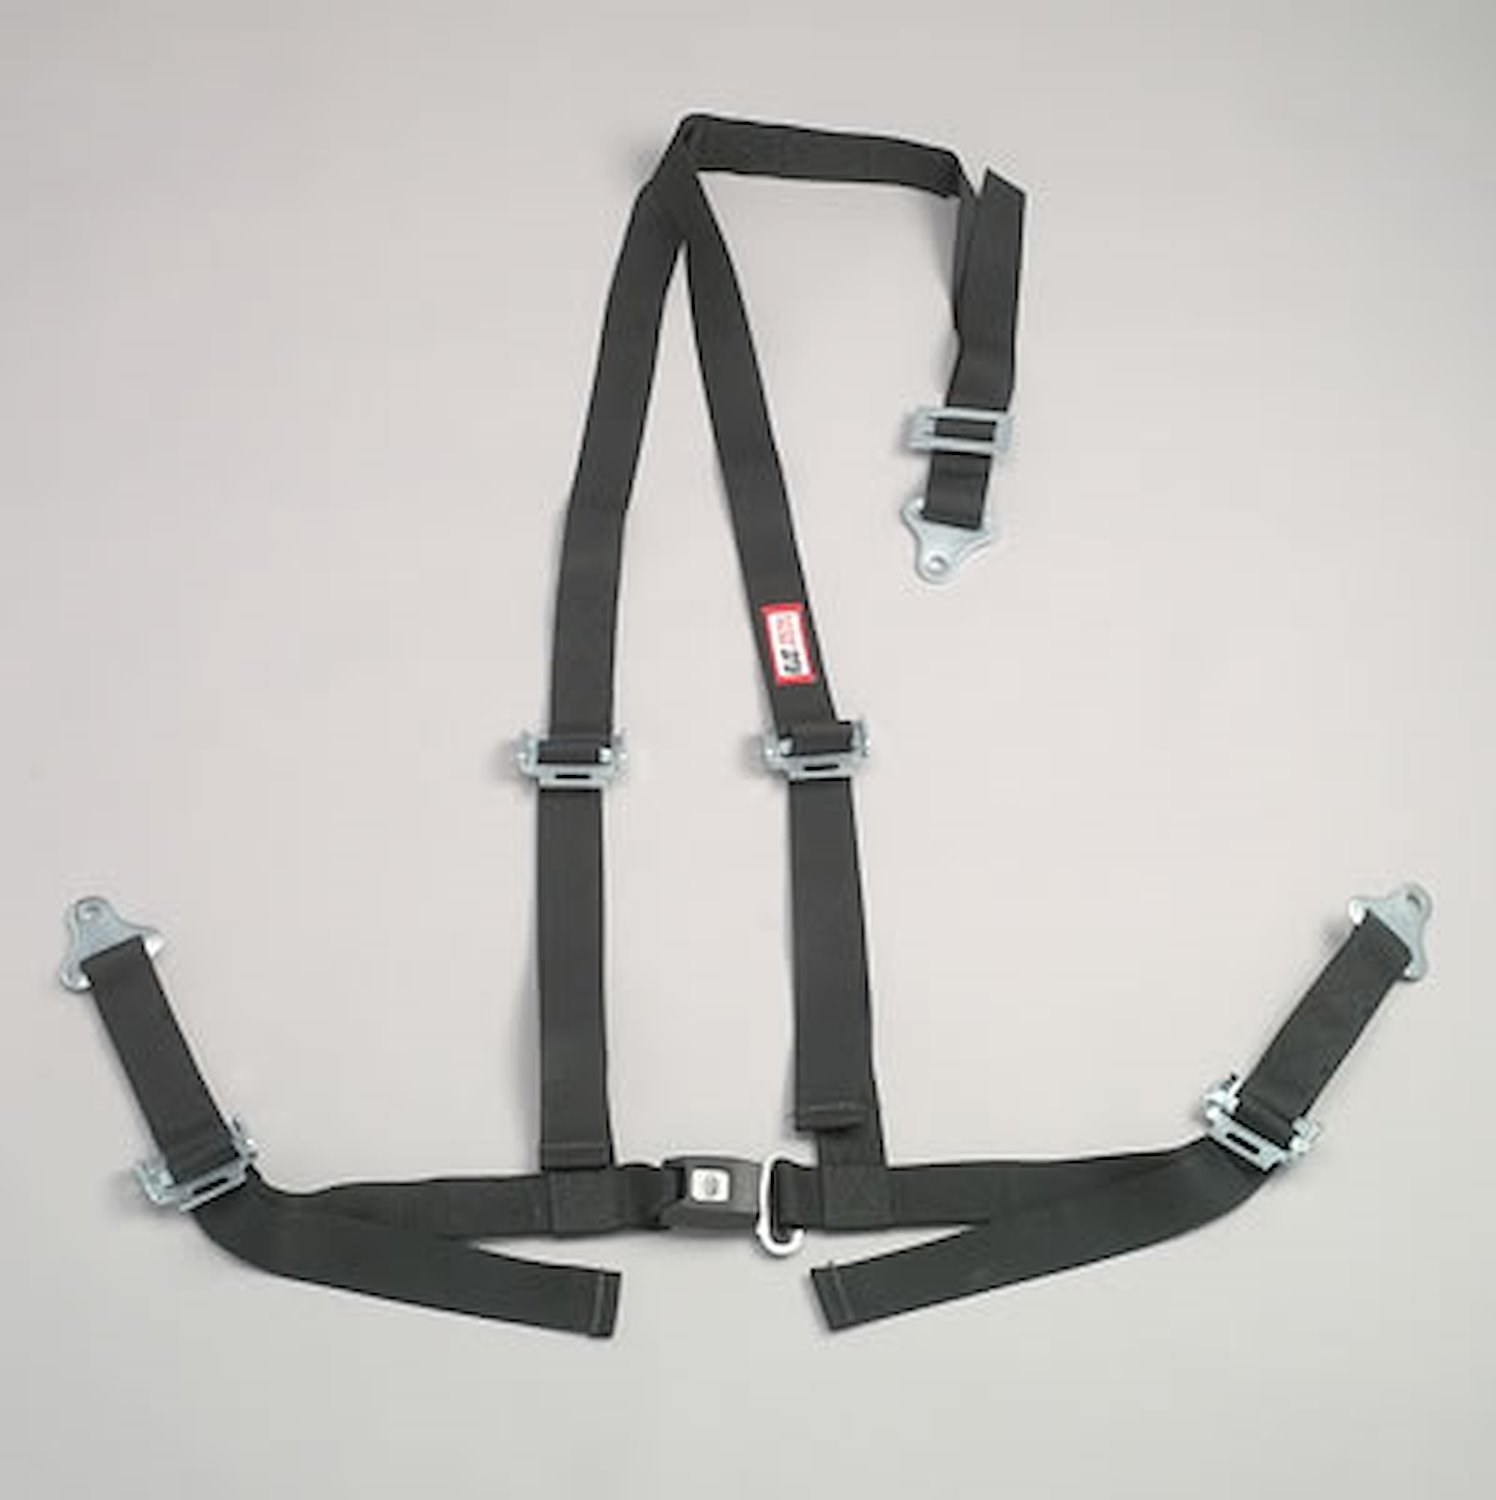 NON-SFI B&T HARNESS 2 PULL DOWN Lap Belt 2 S. H. V ROLL BAR Mount ALL SNAP ENDS w/STERNUM STRAP OD GREEN